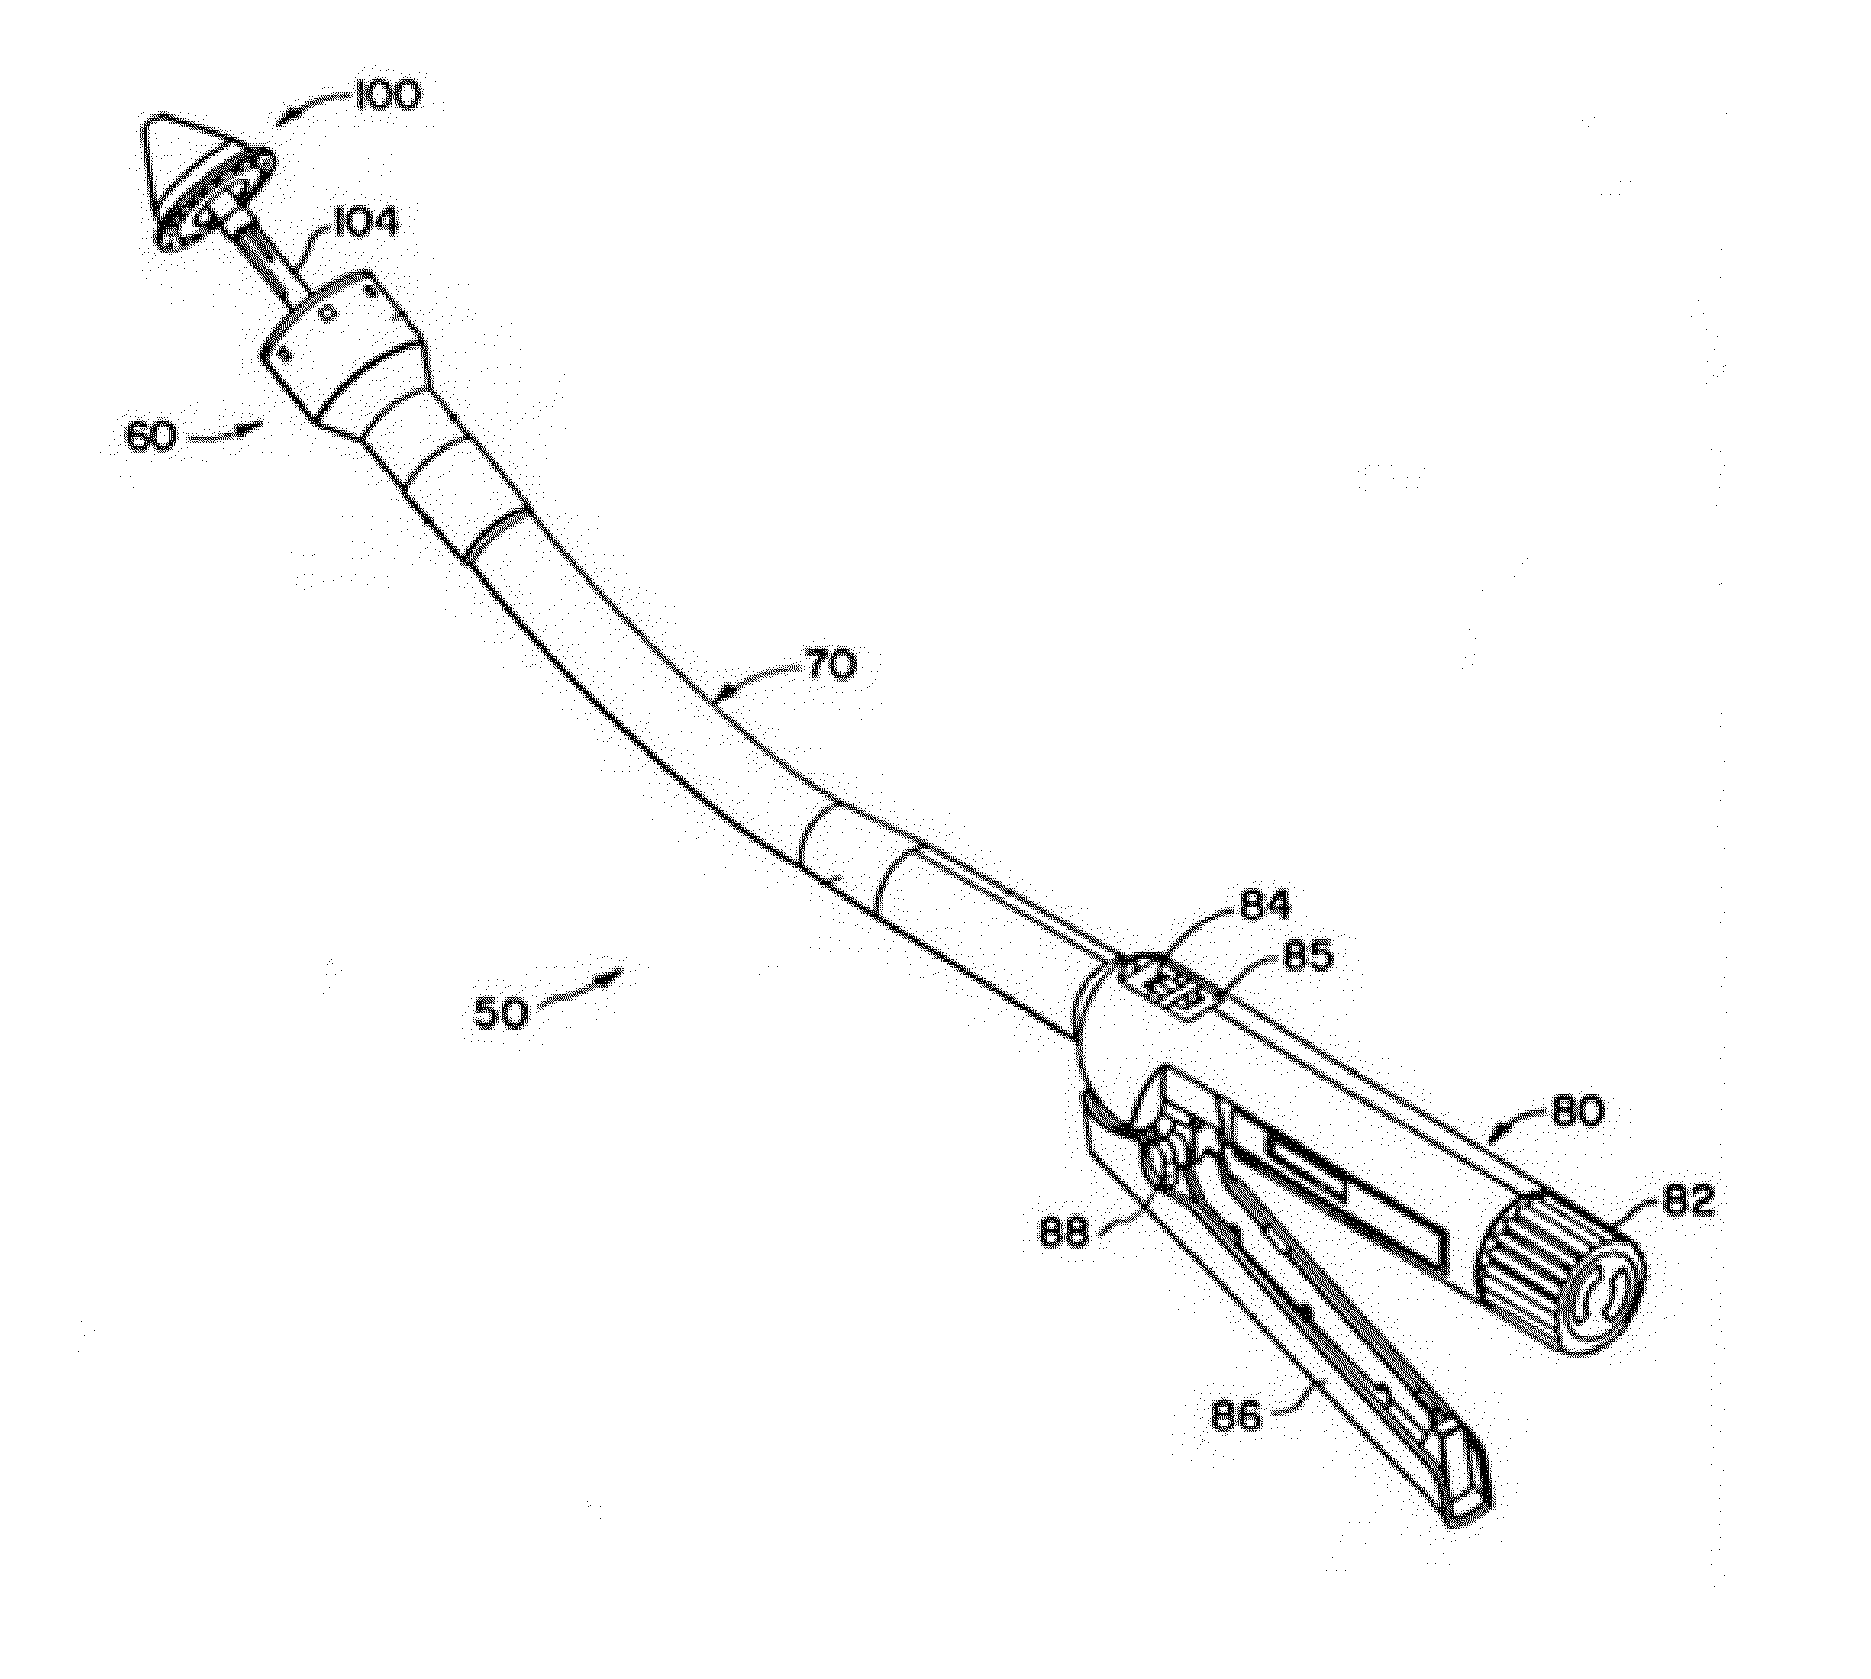 Therapy delivery device for anastomotic joining of tissue